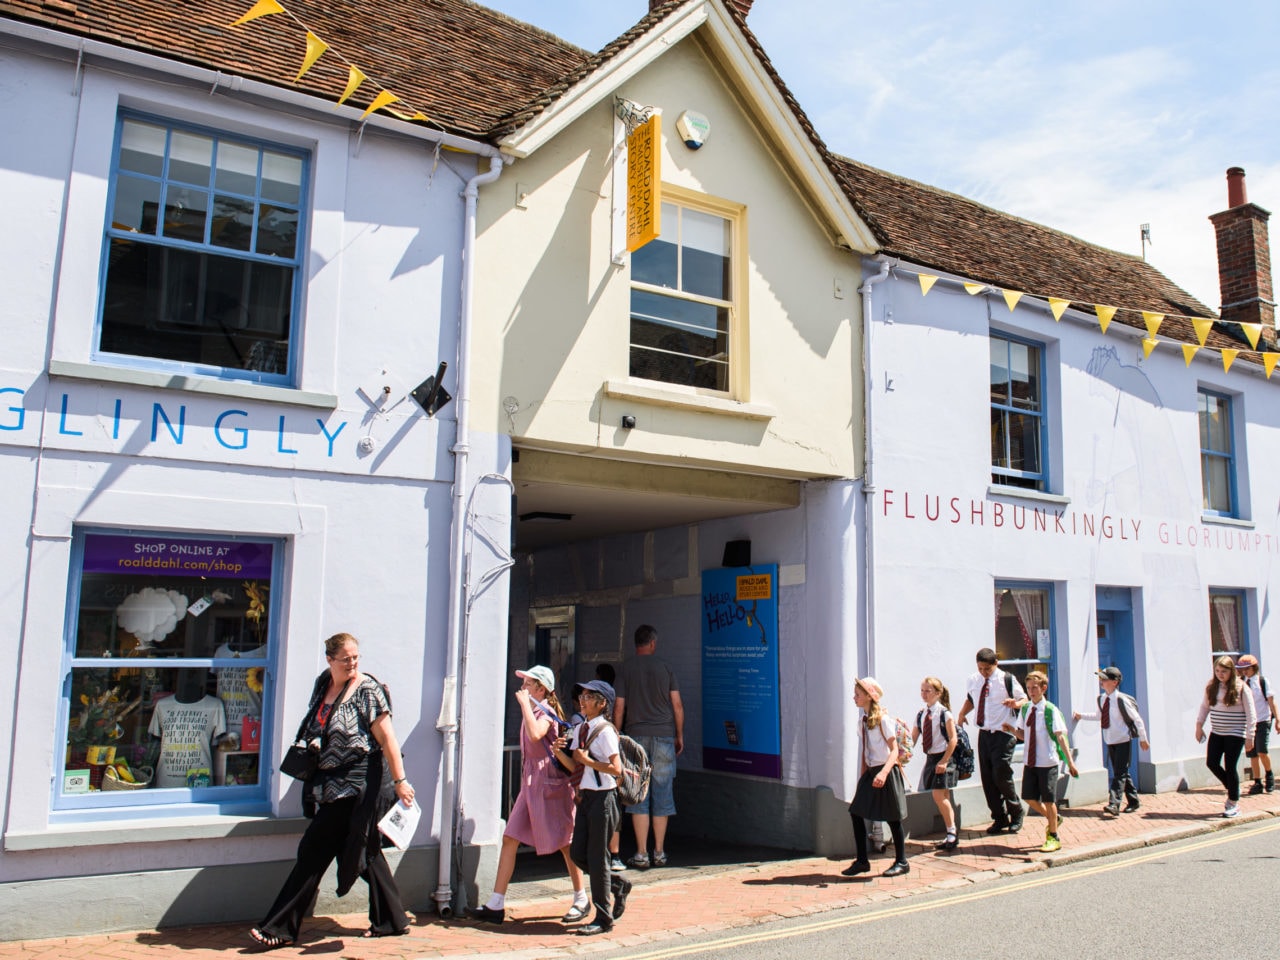 A line of exciting school children in school uniform walk past the Roald Dahl Museum. It's a bright, sunny day and they are being led by a teacher. The Museum building behind them is painted light yellow and purple and has jolly yellow bunting on the roof.